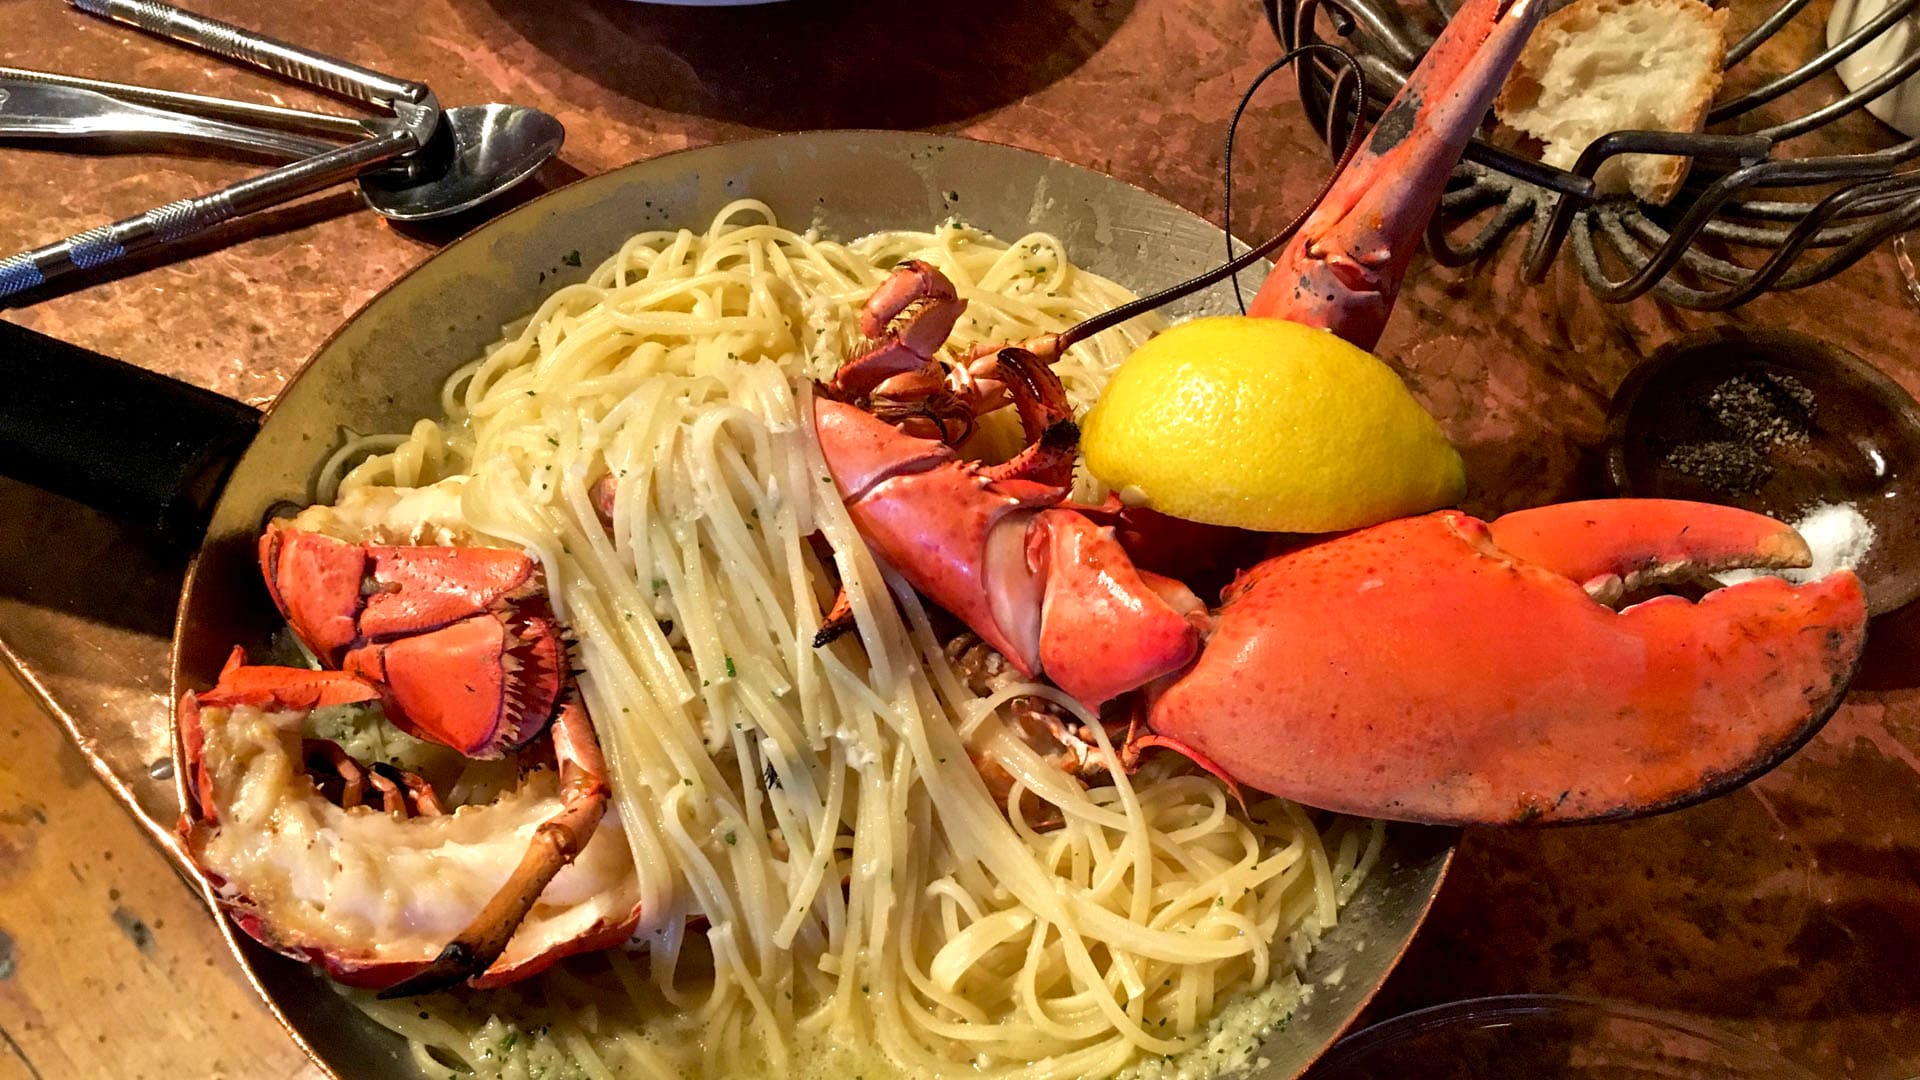 The grilled lobster on linguine at Street and Co. in the Old Port area proves that butter and garlic are lobster's best friends.